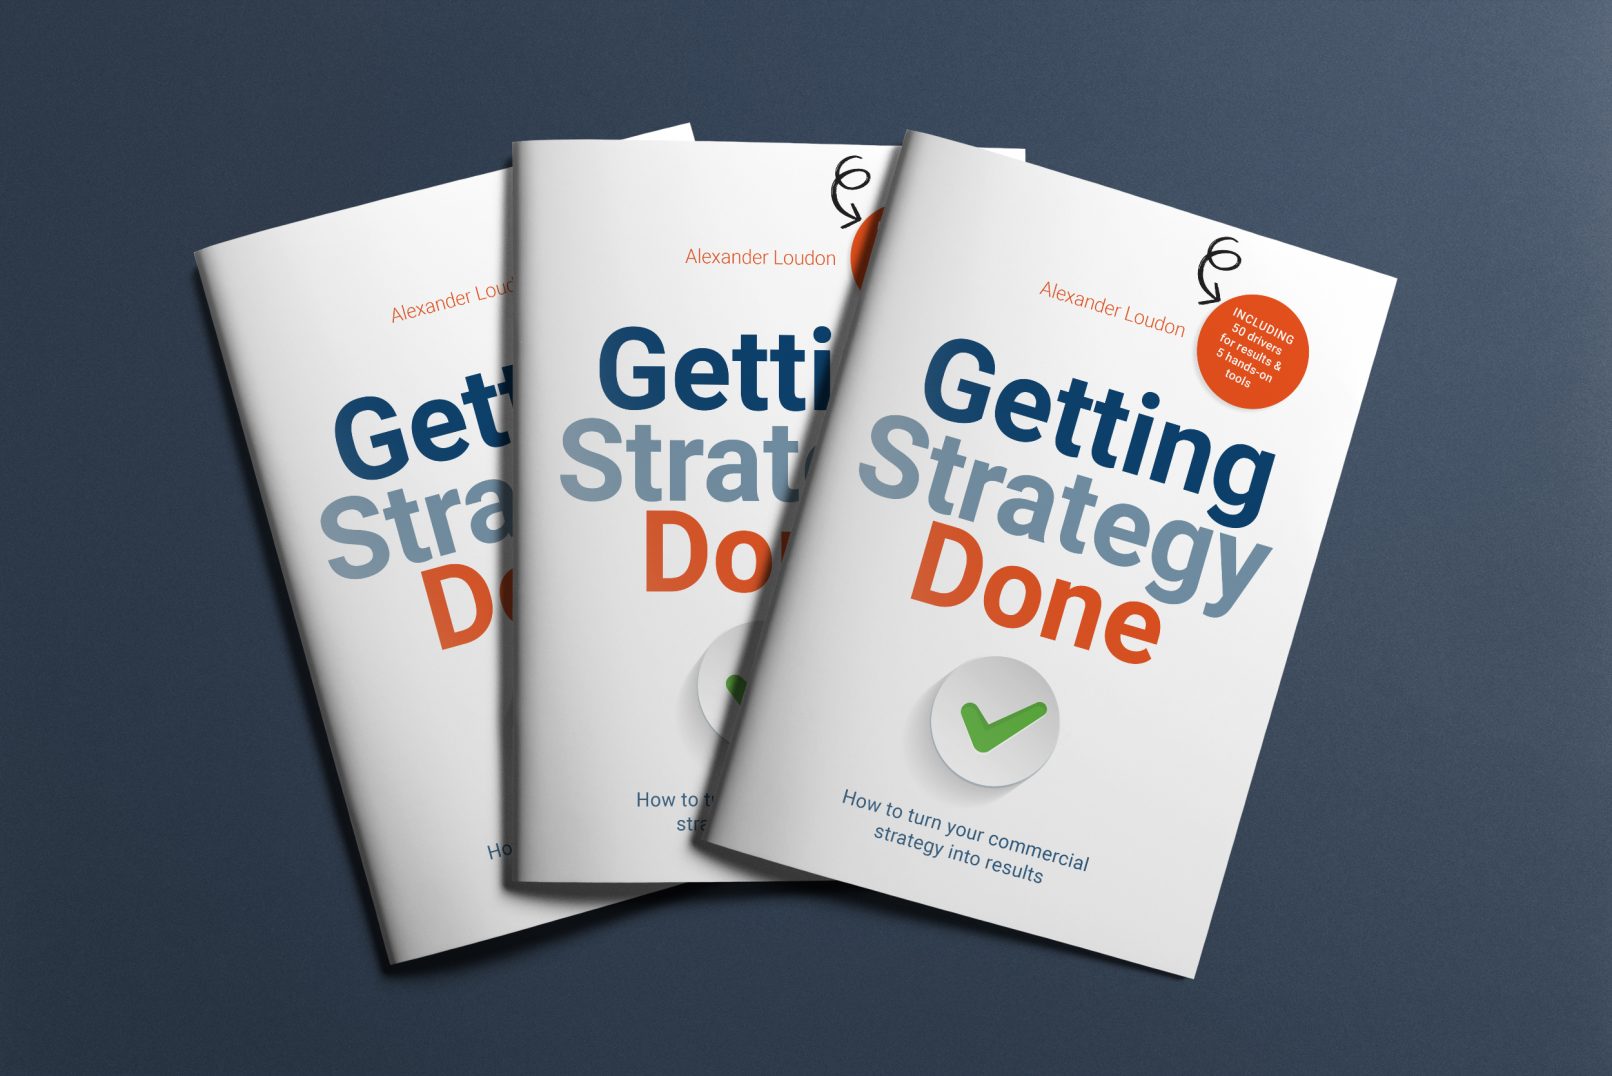 Getting strategy done Alexander Loudon